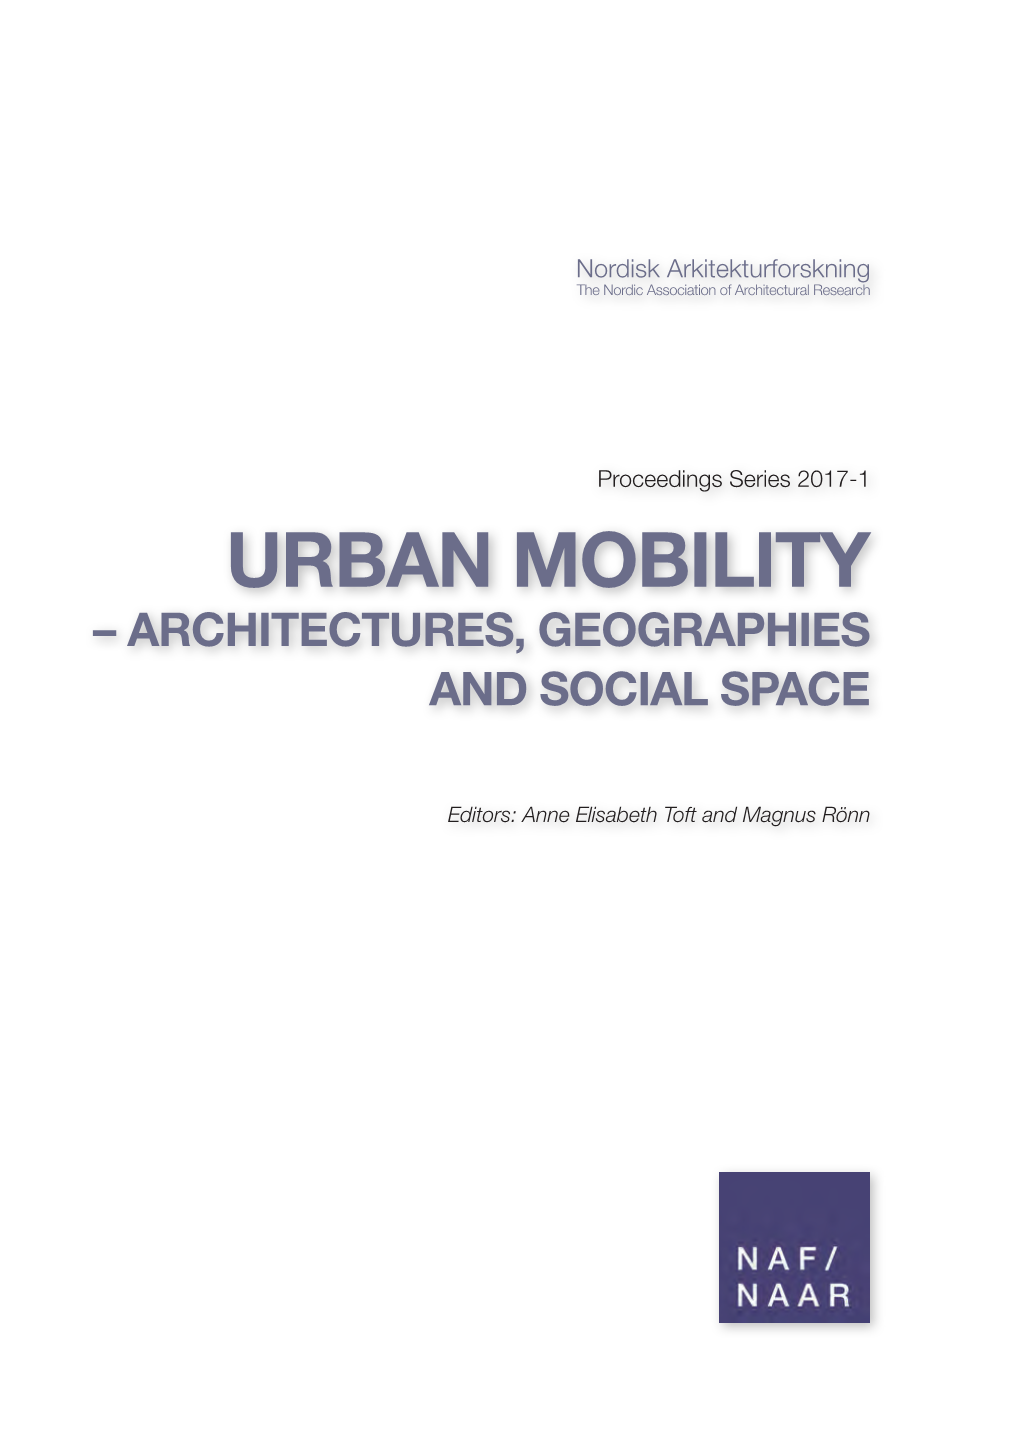 Urban Mobility – Architectures, Geographies and Social Space